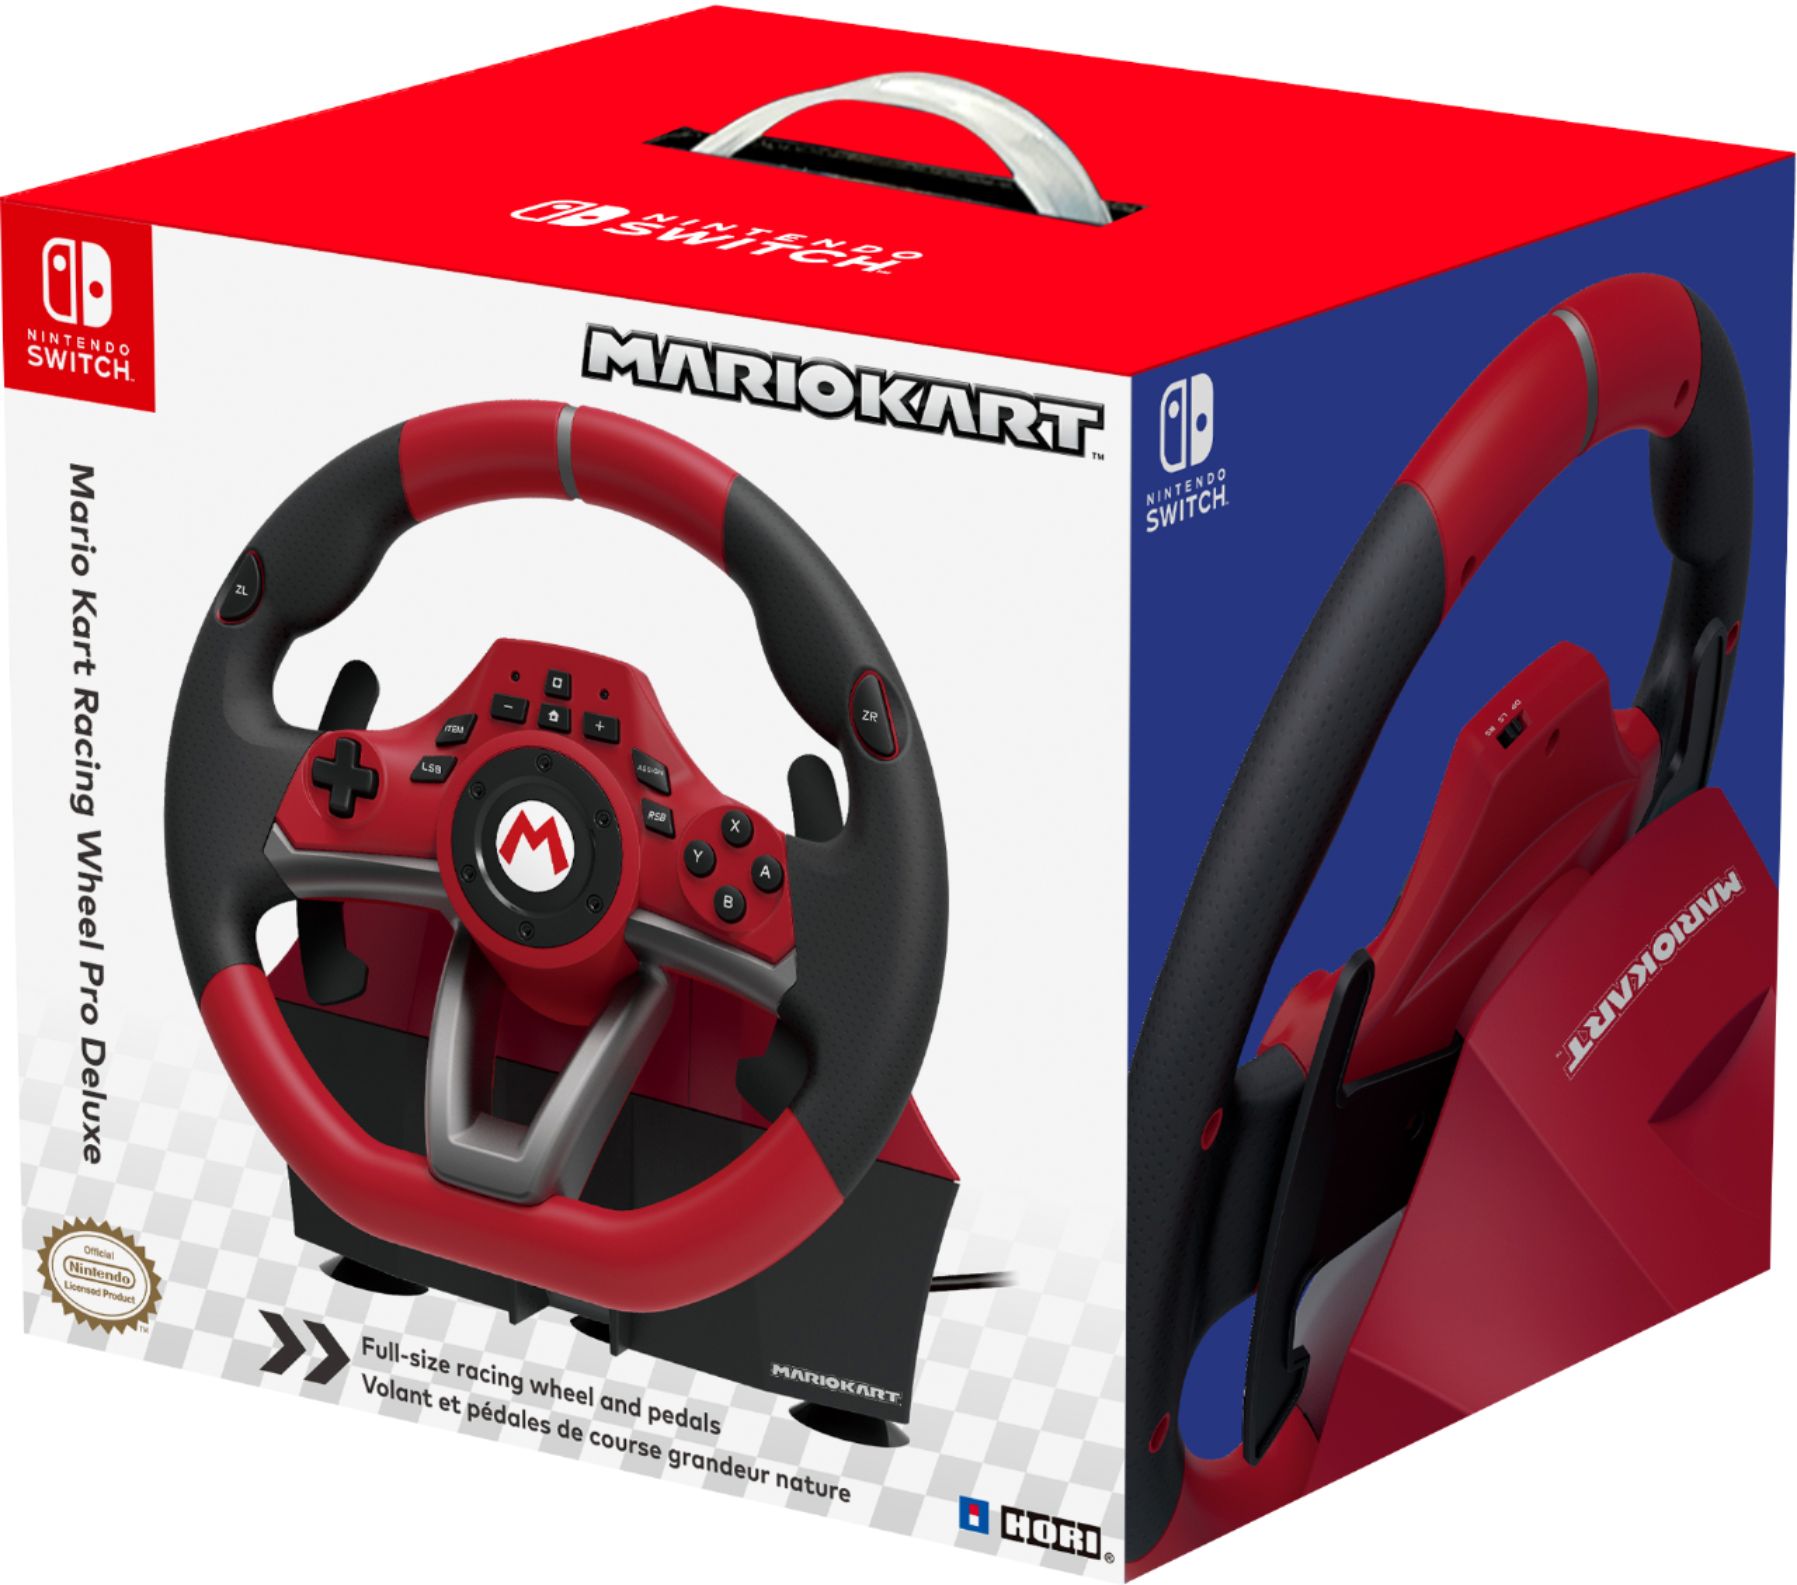 Switch Mario Kart Racing Wheel Pro Deluxe by HORI - Red